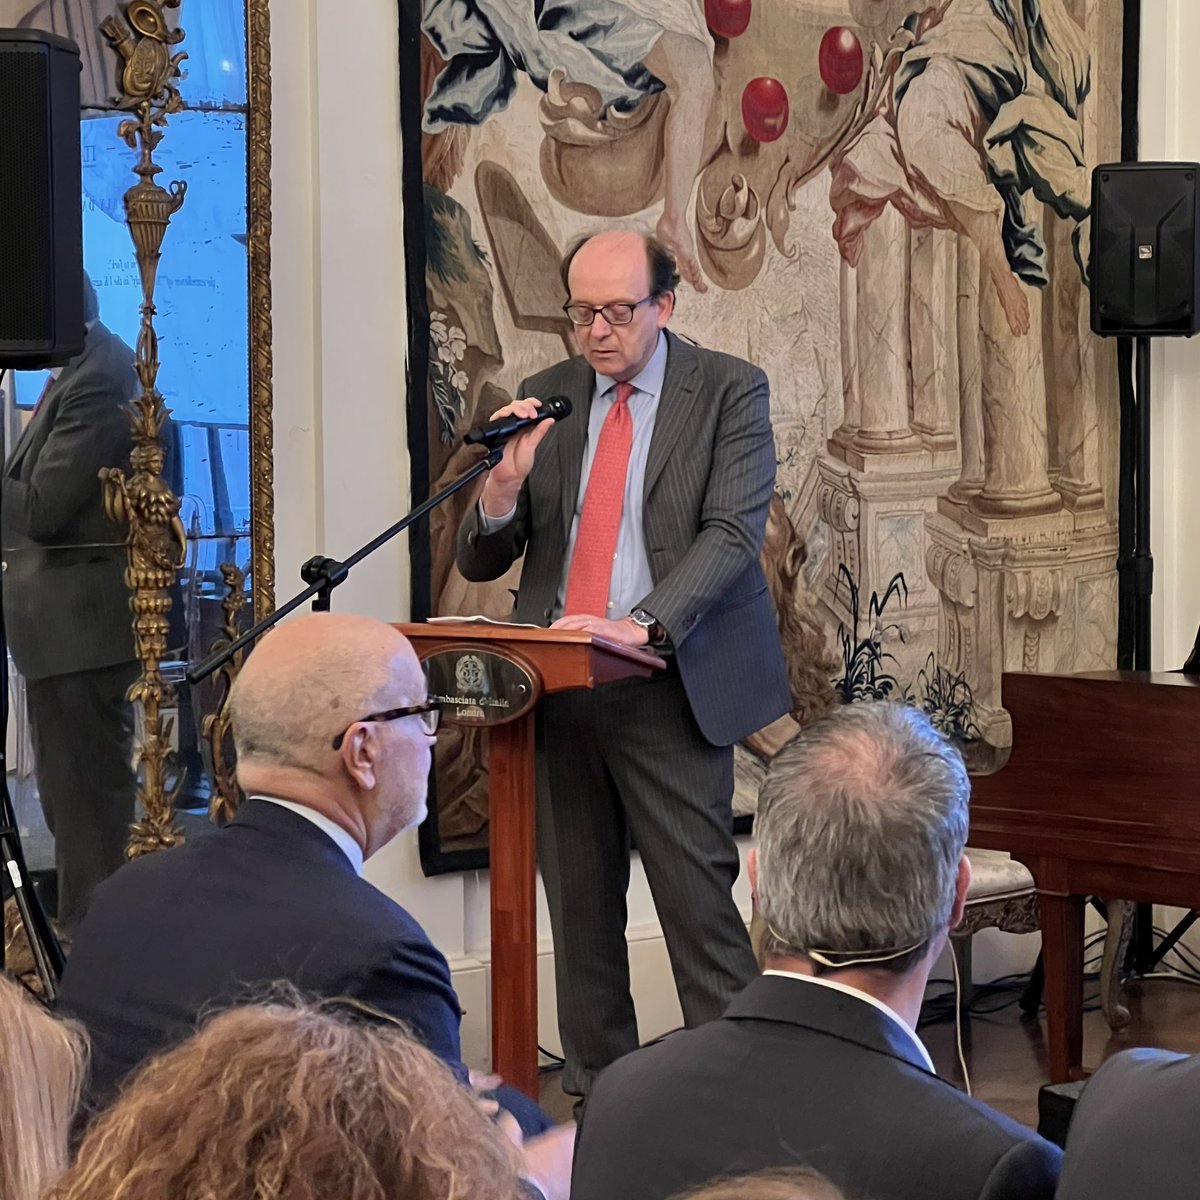 A great evening at the Italian Embassy celebrating the first #MadeInItalyDay 🇮🇹.

Hosted by @ItalyInUK and #ITALondon, the event highlighted the excellence of ‘Made In Italy’ in the UK agri-food industry.

Thank you to all the participating firms and trade associations!